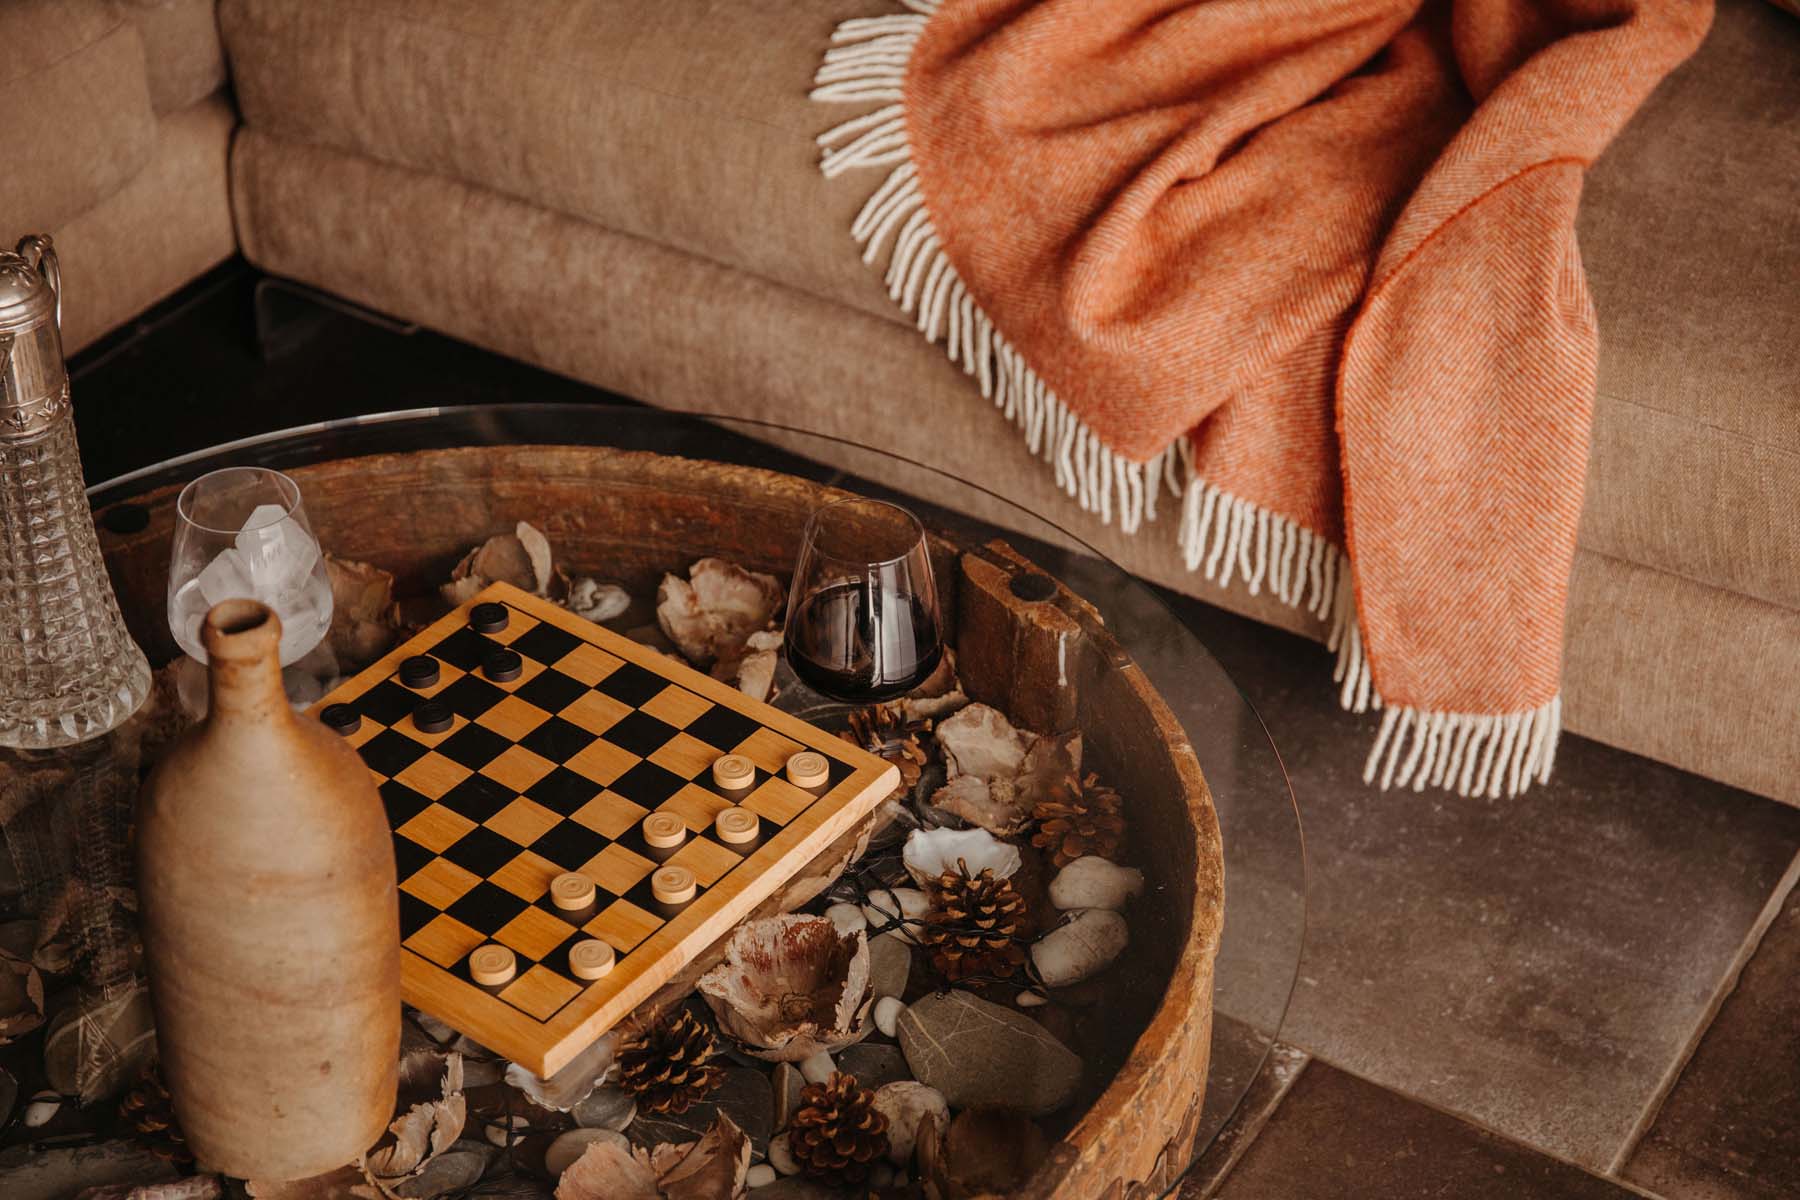 A chess board on a glass coffee table